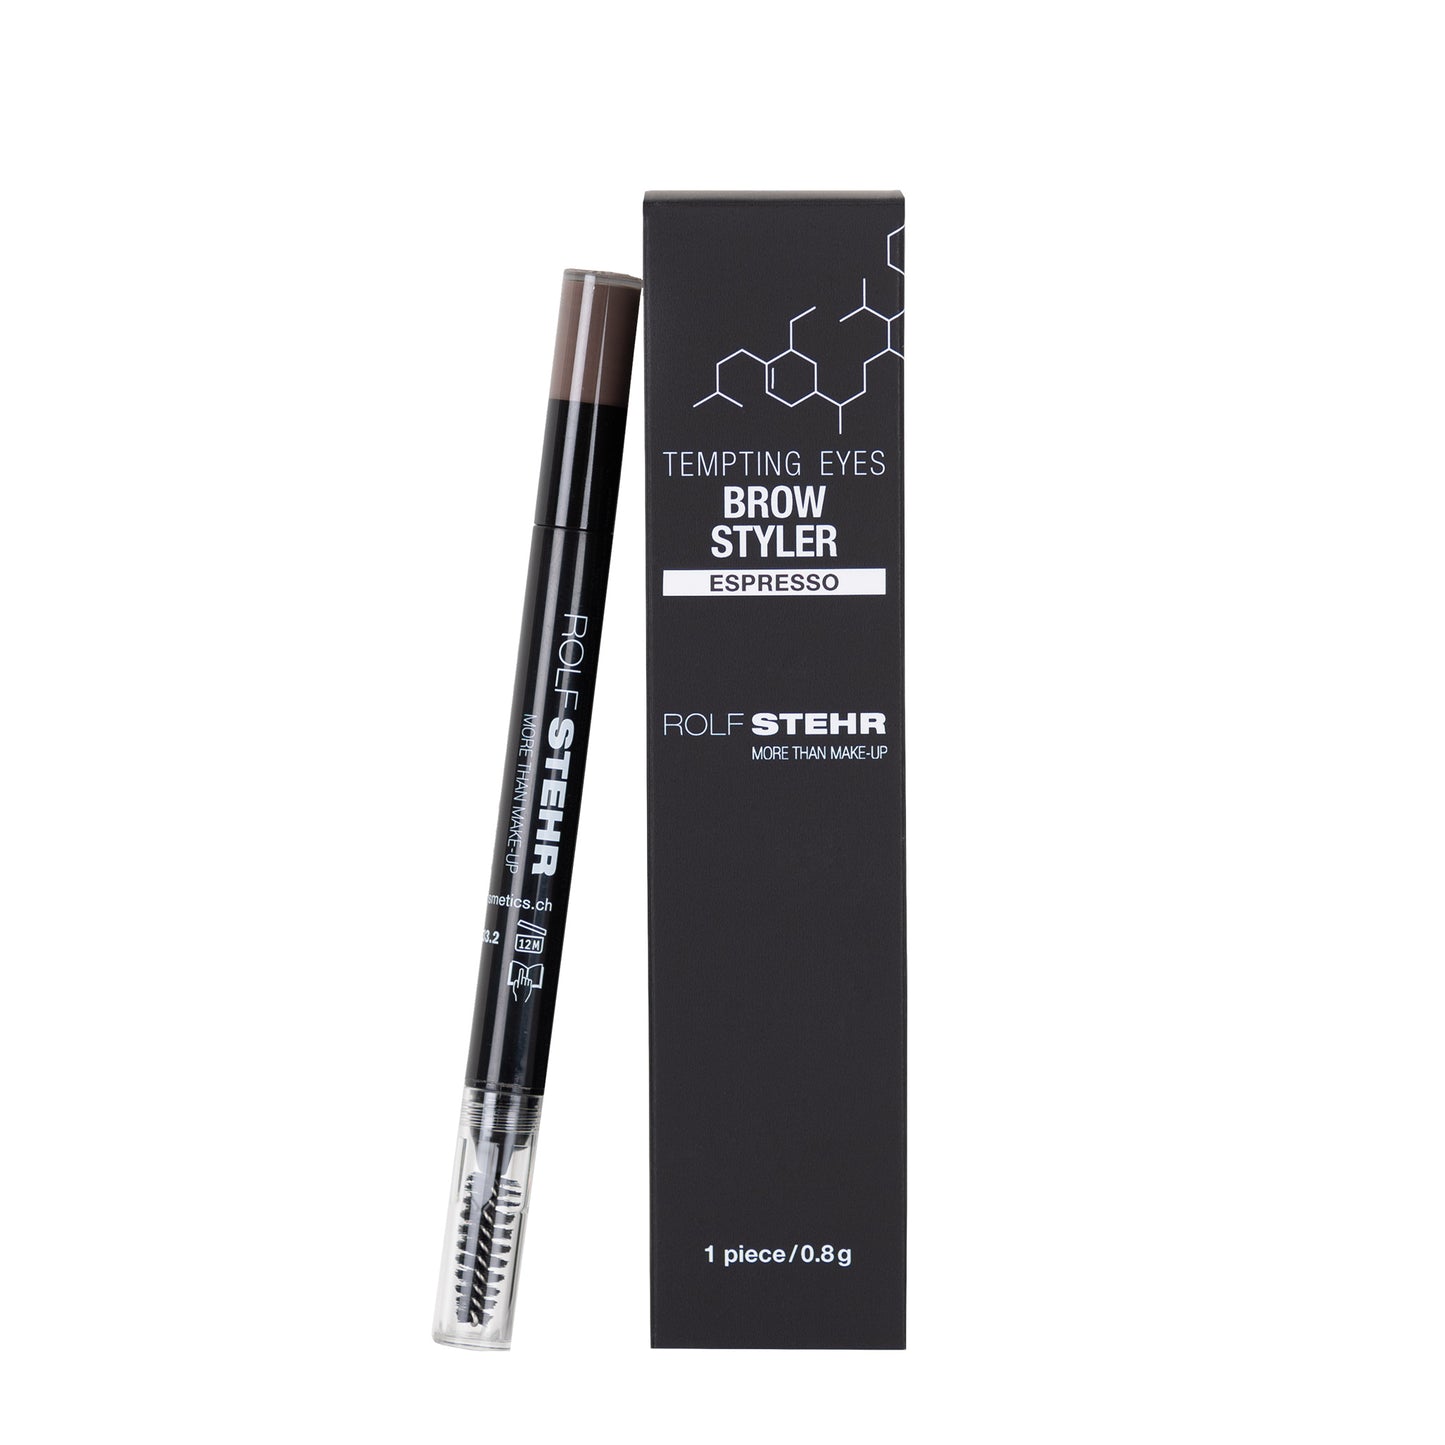 Brow Styler - Espresso <br> More than Make up